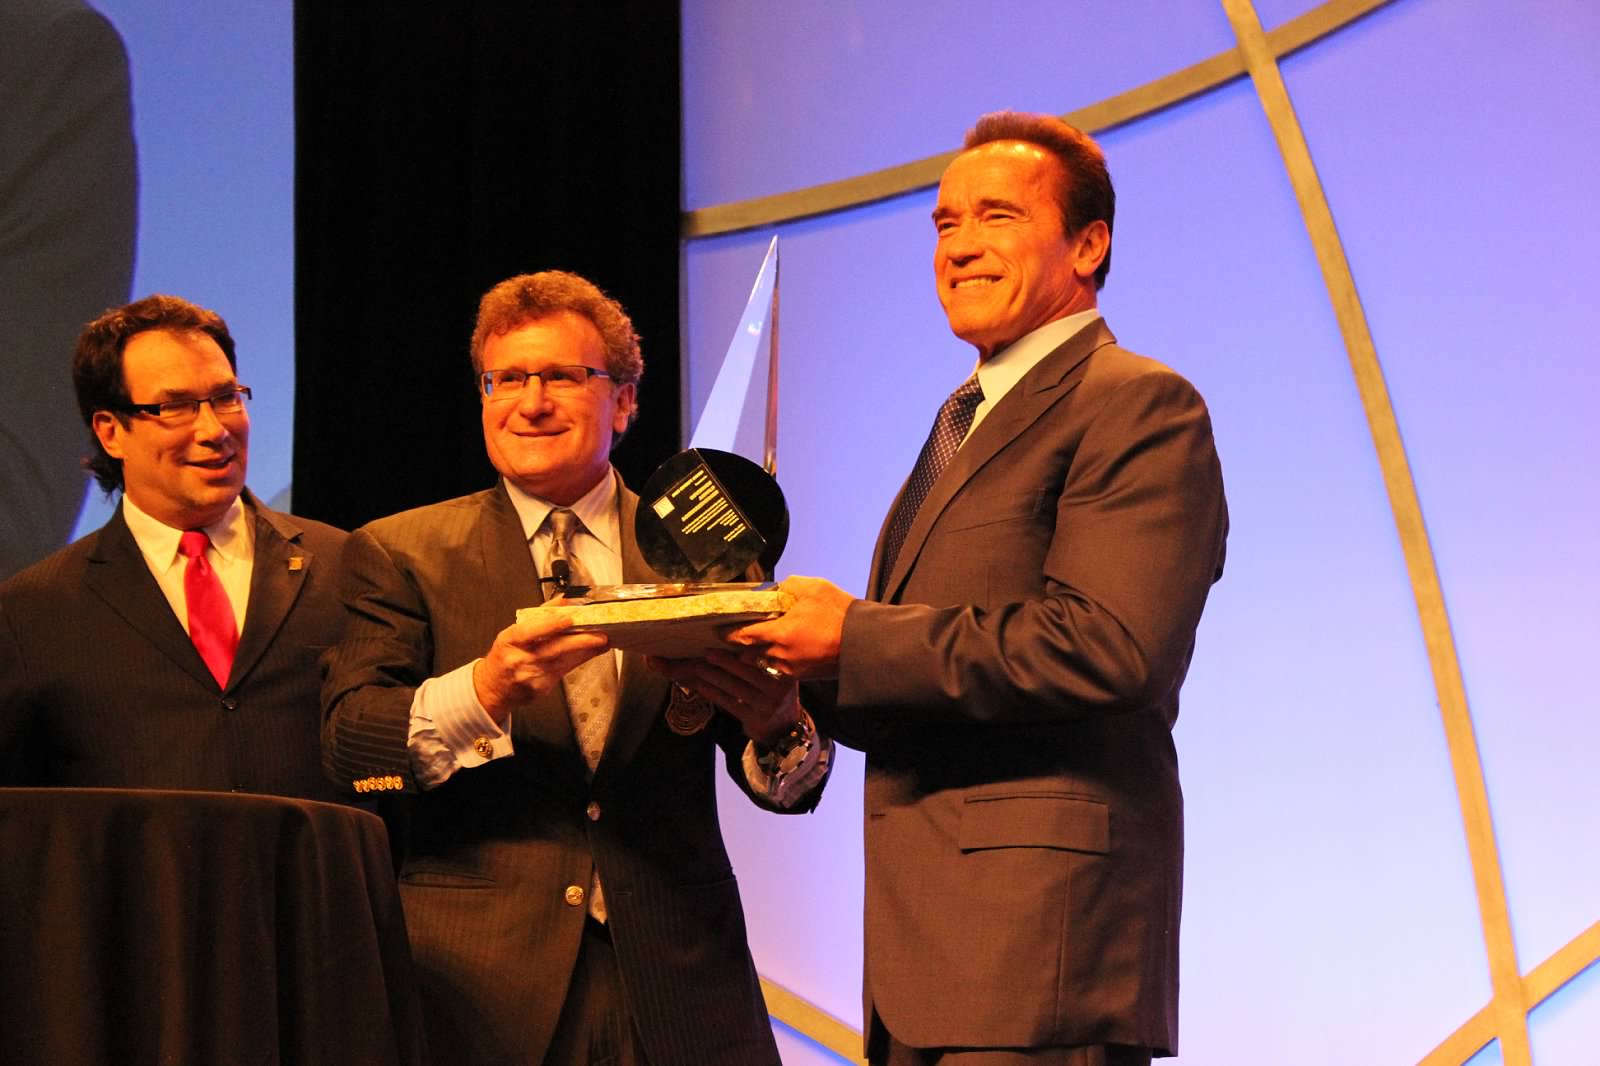 Governor Arnold Schwarzenegger receives the 2013 Infinity Award from A4M co-founders, Dr. Ronald Klatz and Dr. Robert Goldman